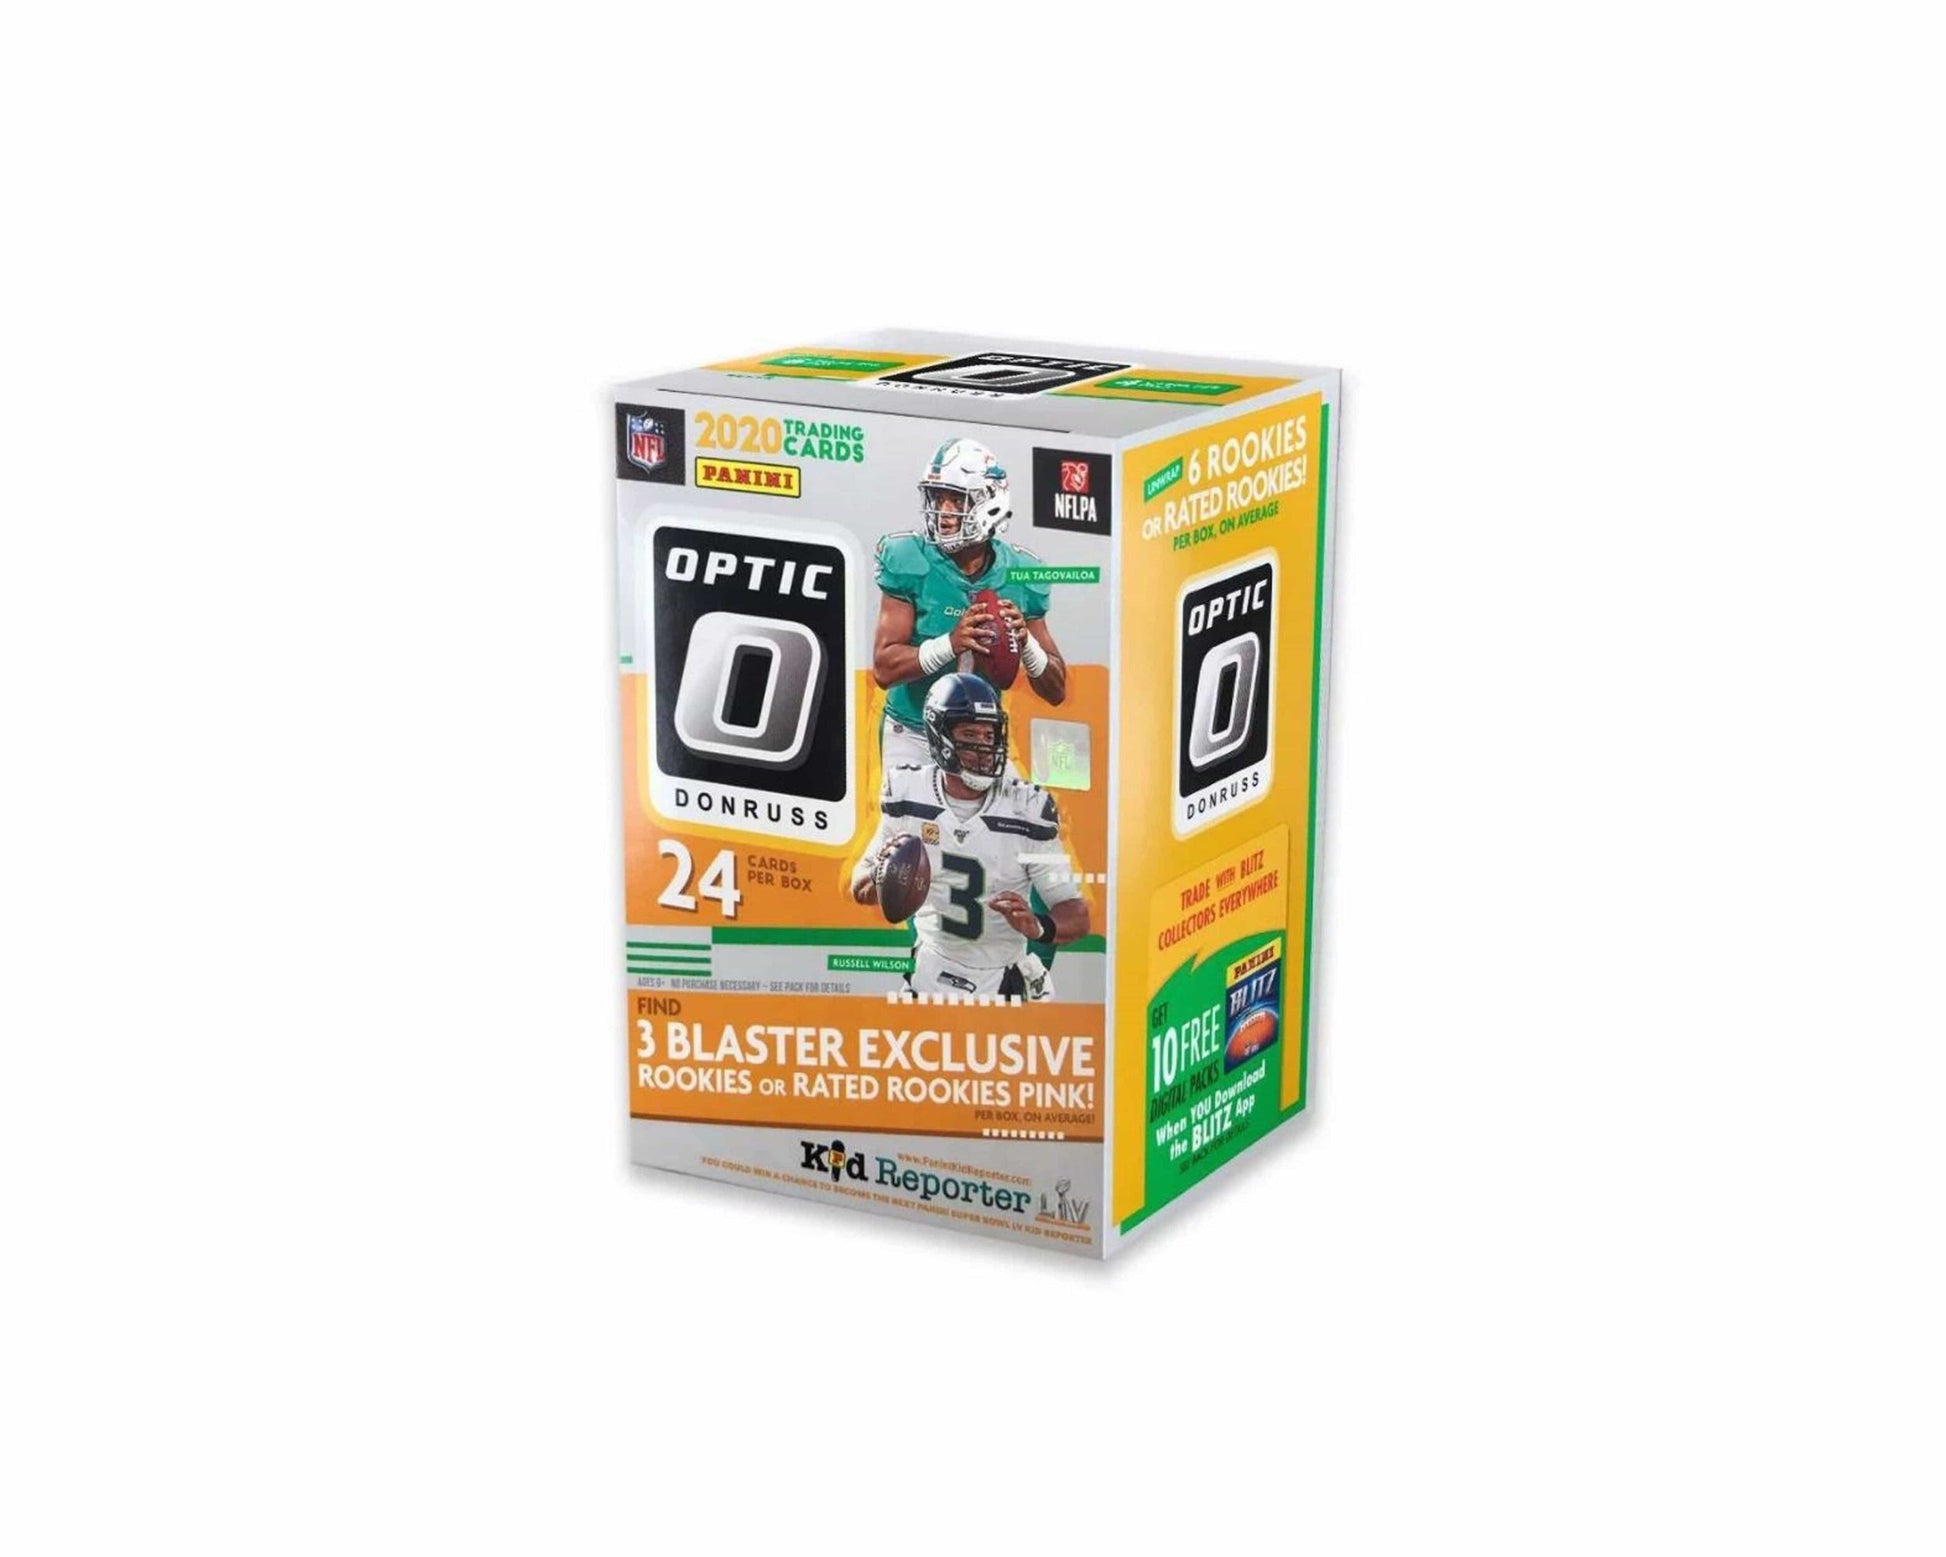 2020 Panini Donruss Optic Football Blaster Box Pink Parallels - Only at BallersClubKickz.com - Panini Football is back again updating the look of its cornerstone Donruss set with 2020 Panini Donruss Optic Football. The 2020 set saw hobby boxes released on February 10, 2021 and retail products began showing up in stores in the days following. The 2020 Donruss Optic Football Blaster Box Pink Parallels has a retail price of $19.99, and comes with 6 packs, each holding 4 cards. 